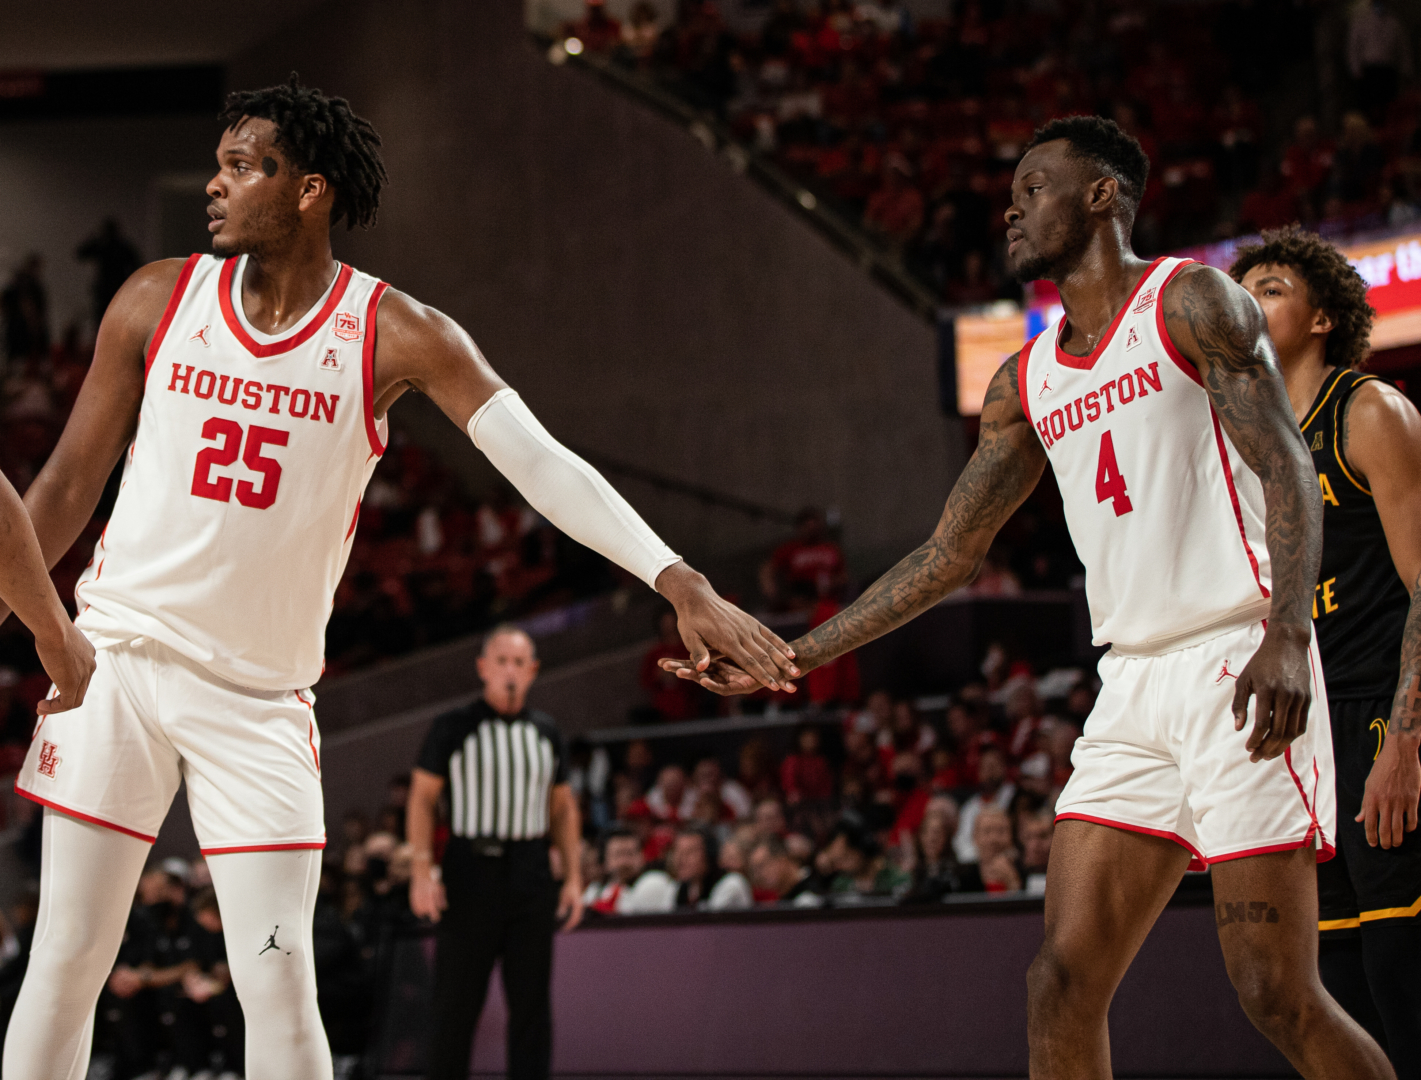 Josh Carlton and Taze Moore, who both transferred to UH this year, have played key roles in the Cougars' success over the course of the season. | Sean Thomas/The Cougar